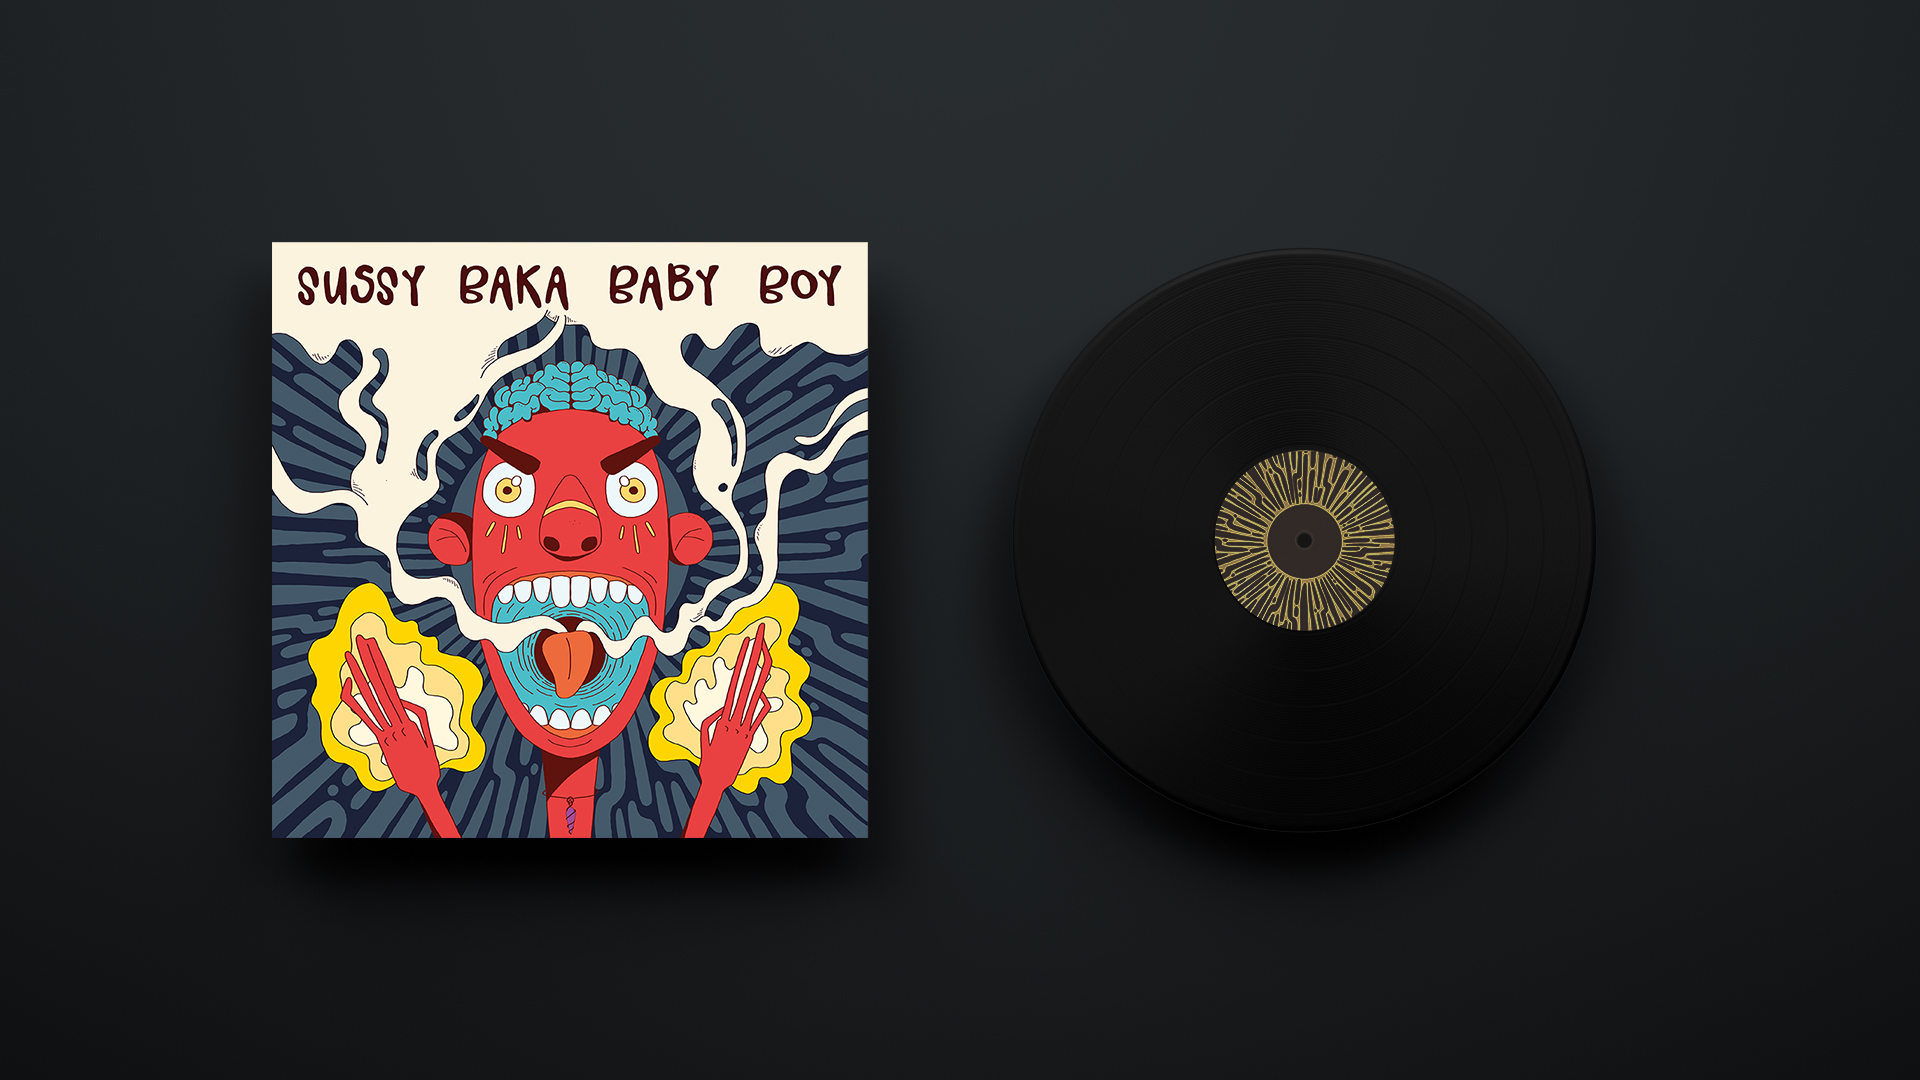 Sussy Baka Baby Boy – Front Cover and Vinyl